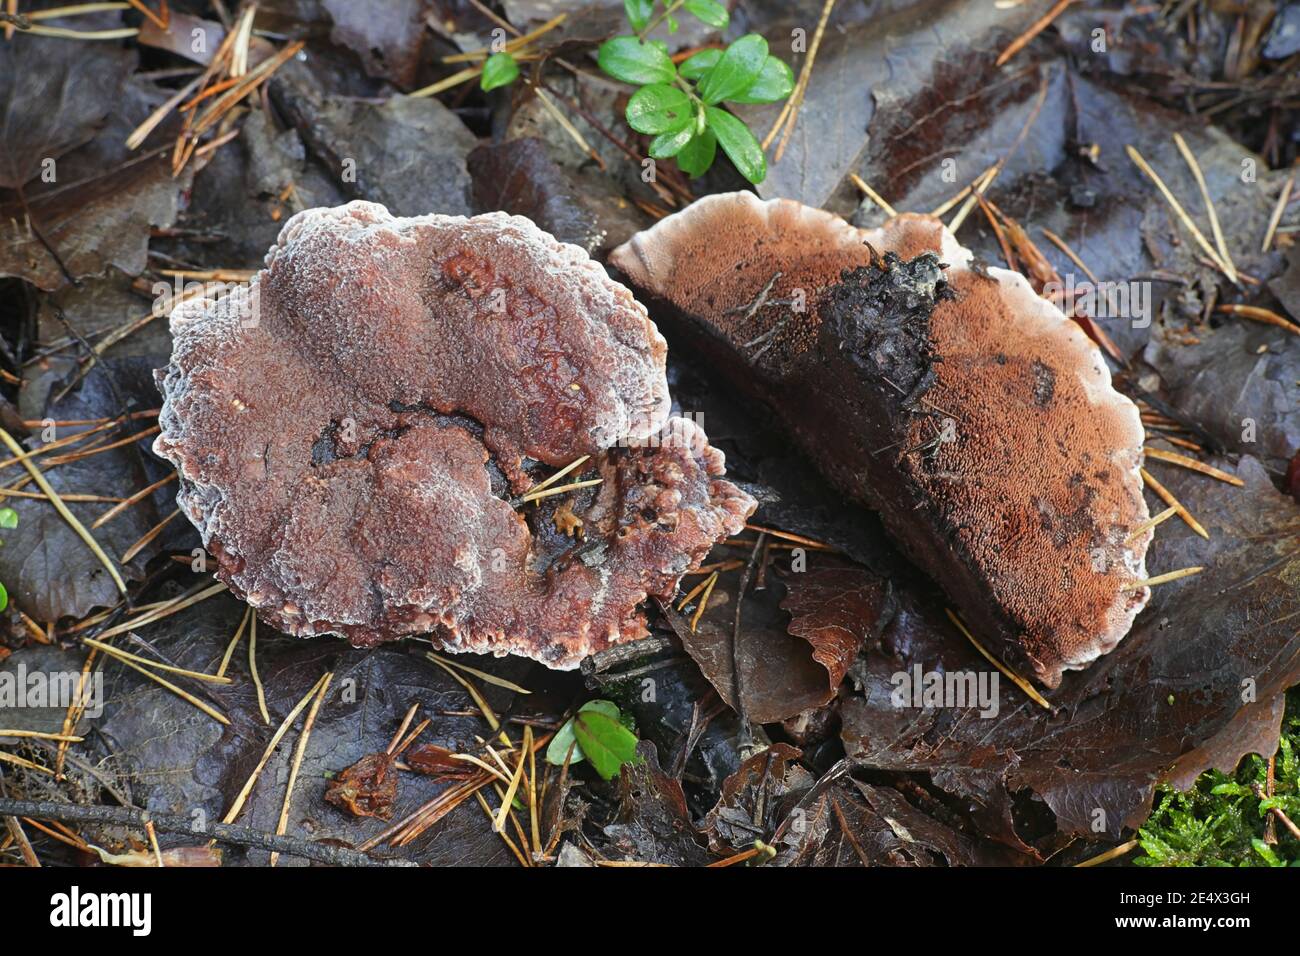 Hydnellum ferrugineum, known as the mealy tooth or the reddish-brown corky spine fungus, wild mushroom from Finland Stock Photo